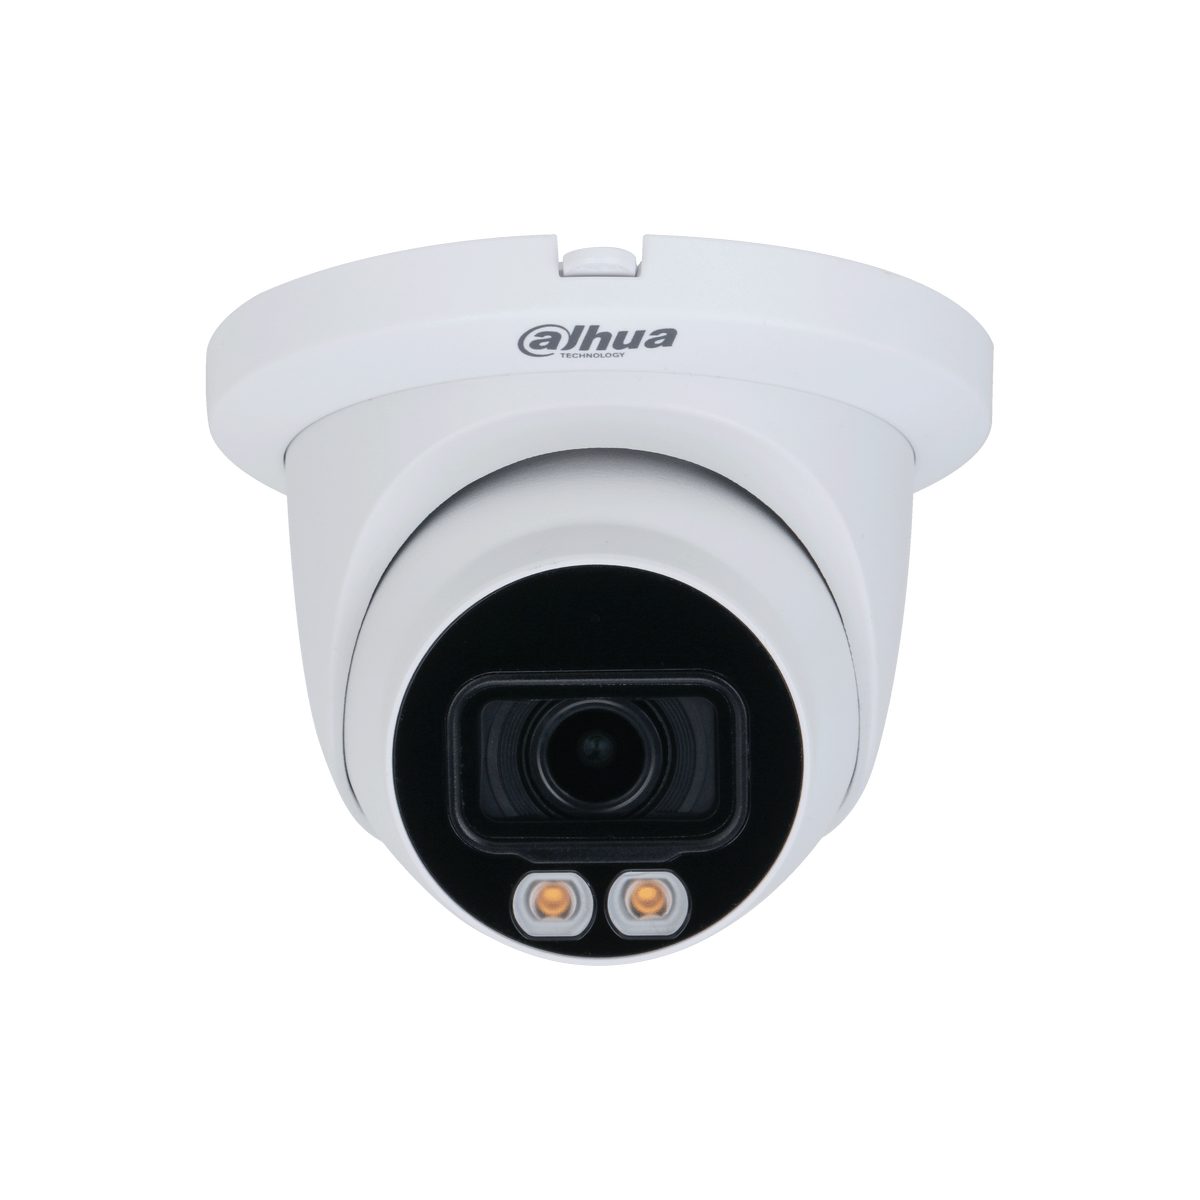 DAHUA IPC-HDBW5449R-ASE-LED  4MP Full-color Fixed-focal Warm LED Dome WizMind Network Camera